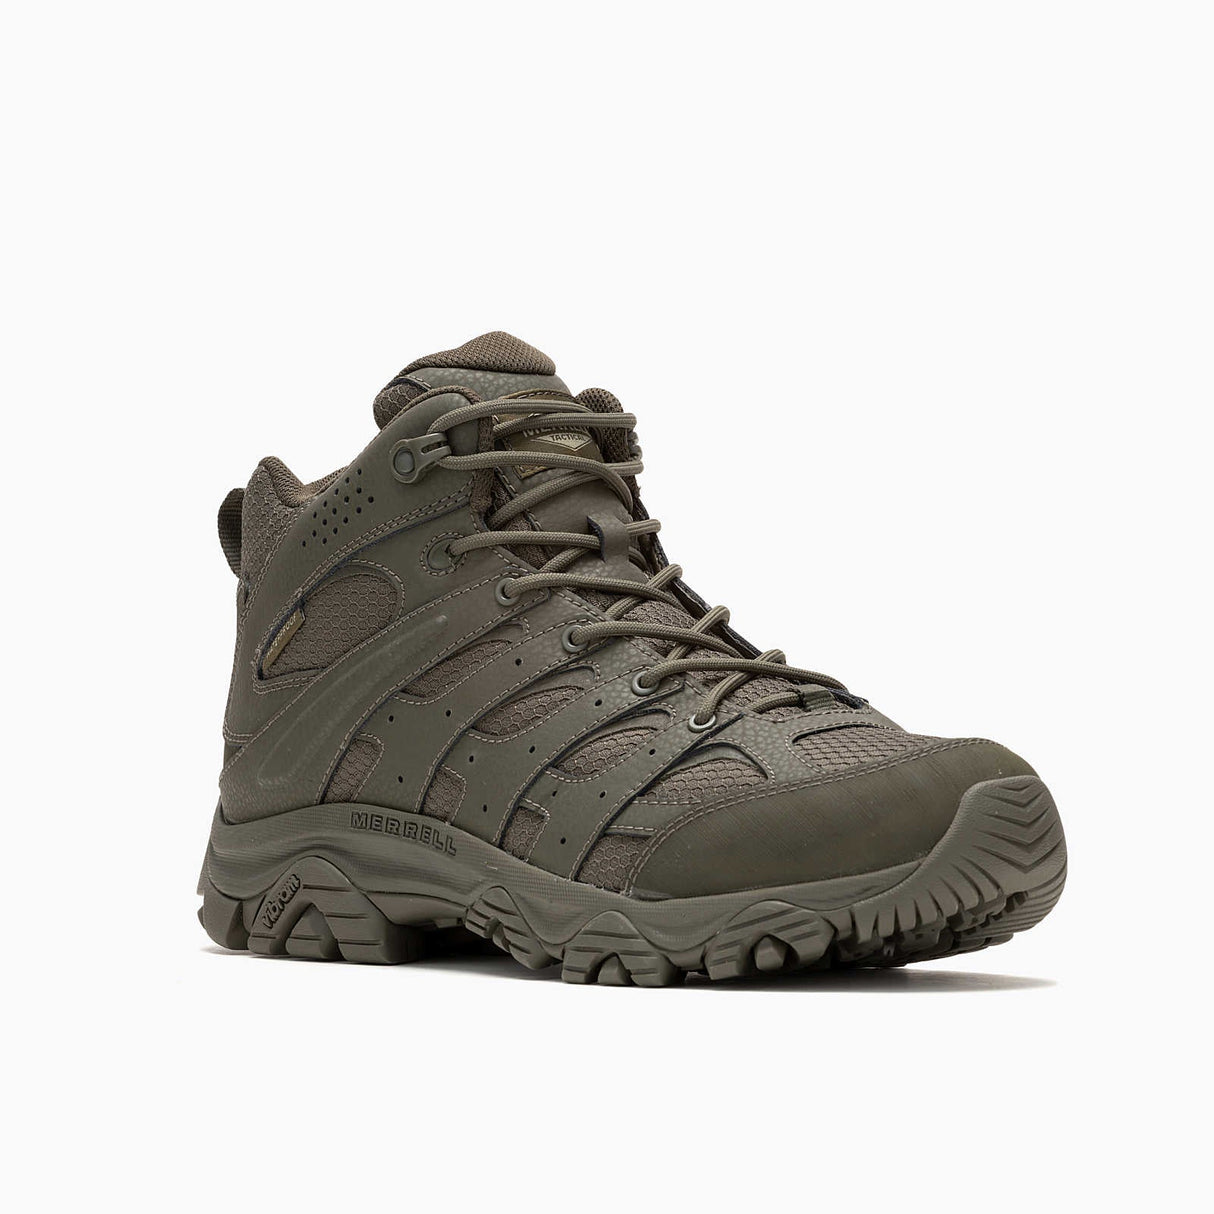 Moab 3 Mid Men's Tactical Work Boots Wp Tactical Dark Olive-Men's Tactical Work Boots-Merrell-Steel Toes